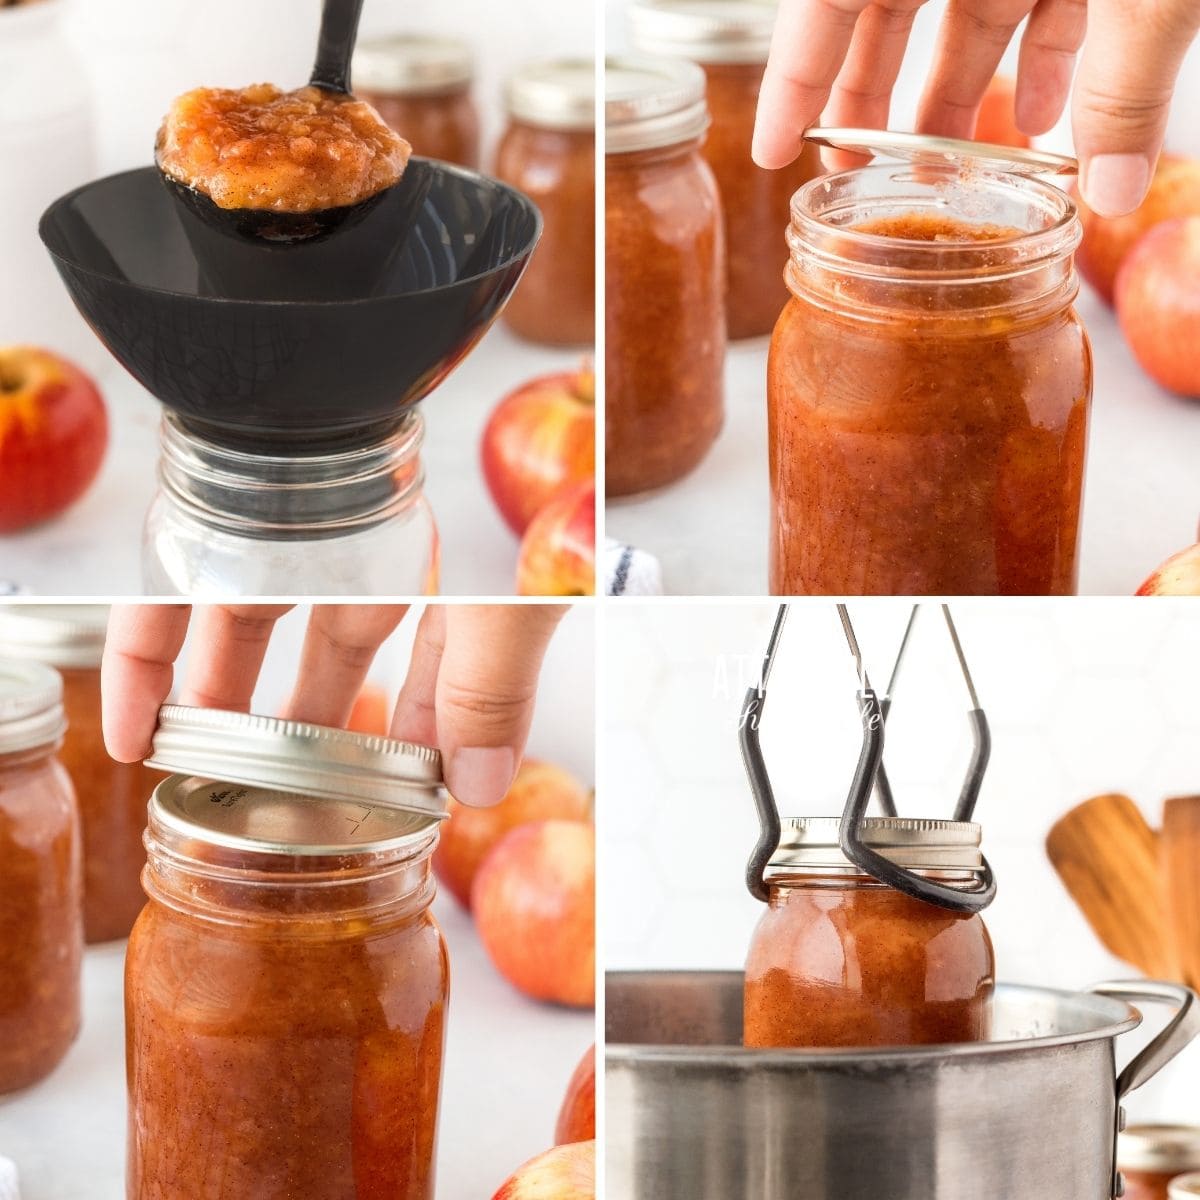 process of filling jars with apple sauce.